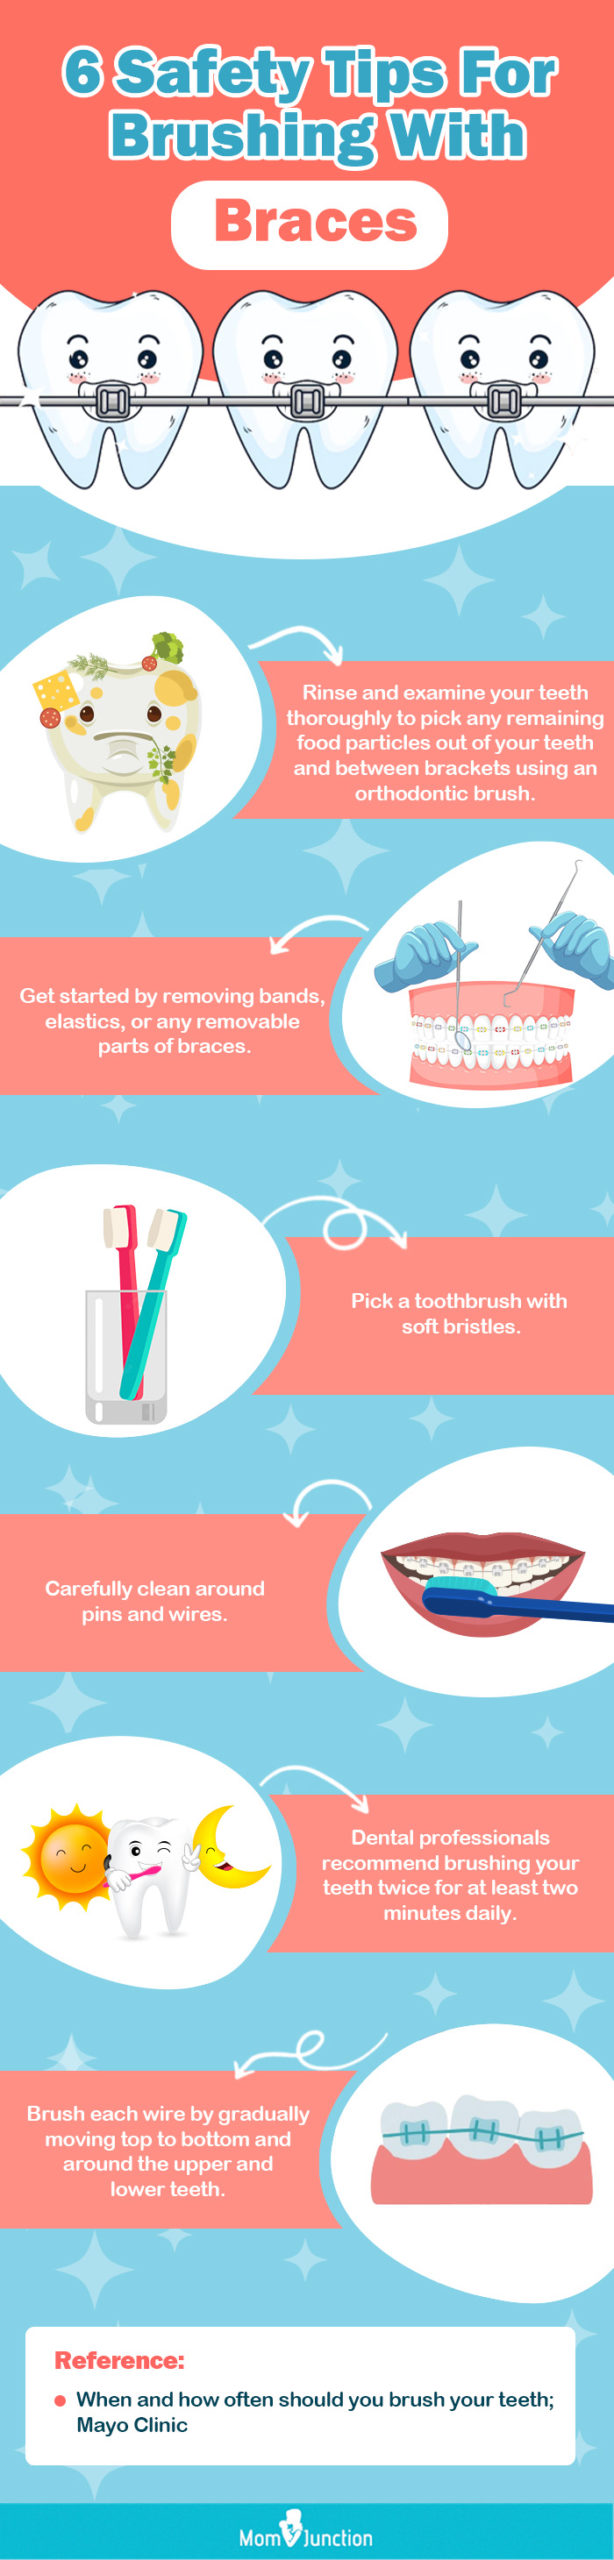 6 Safety Tips While Brushing With Braces